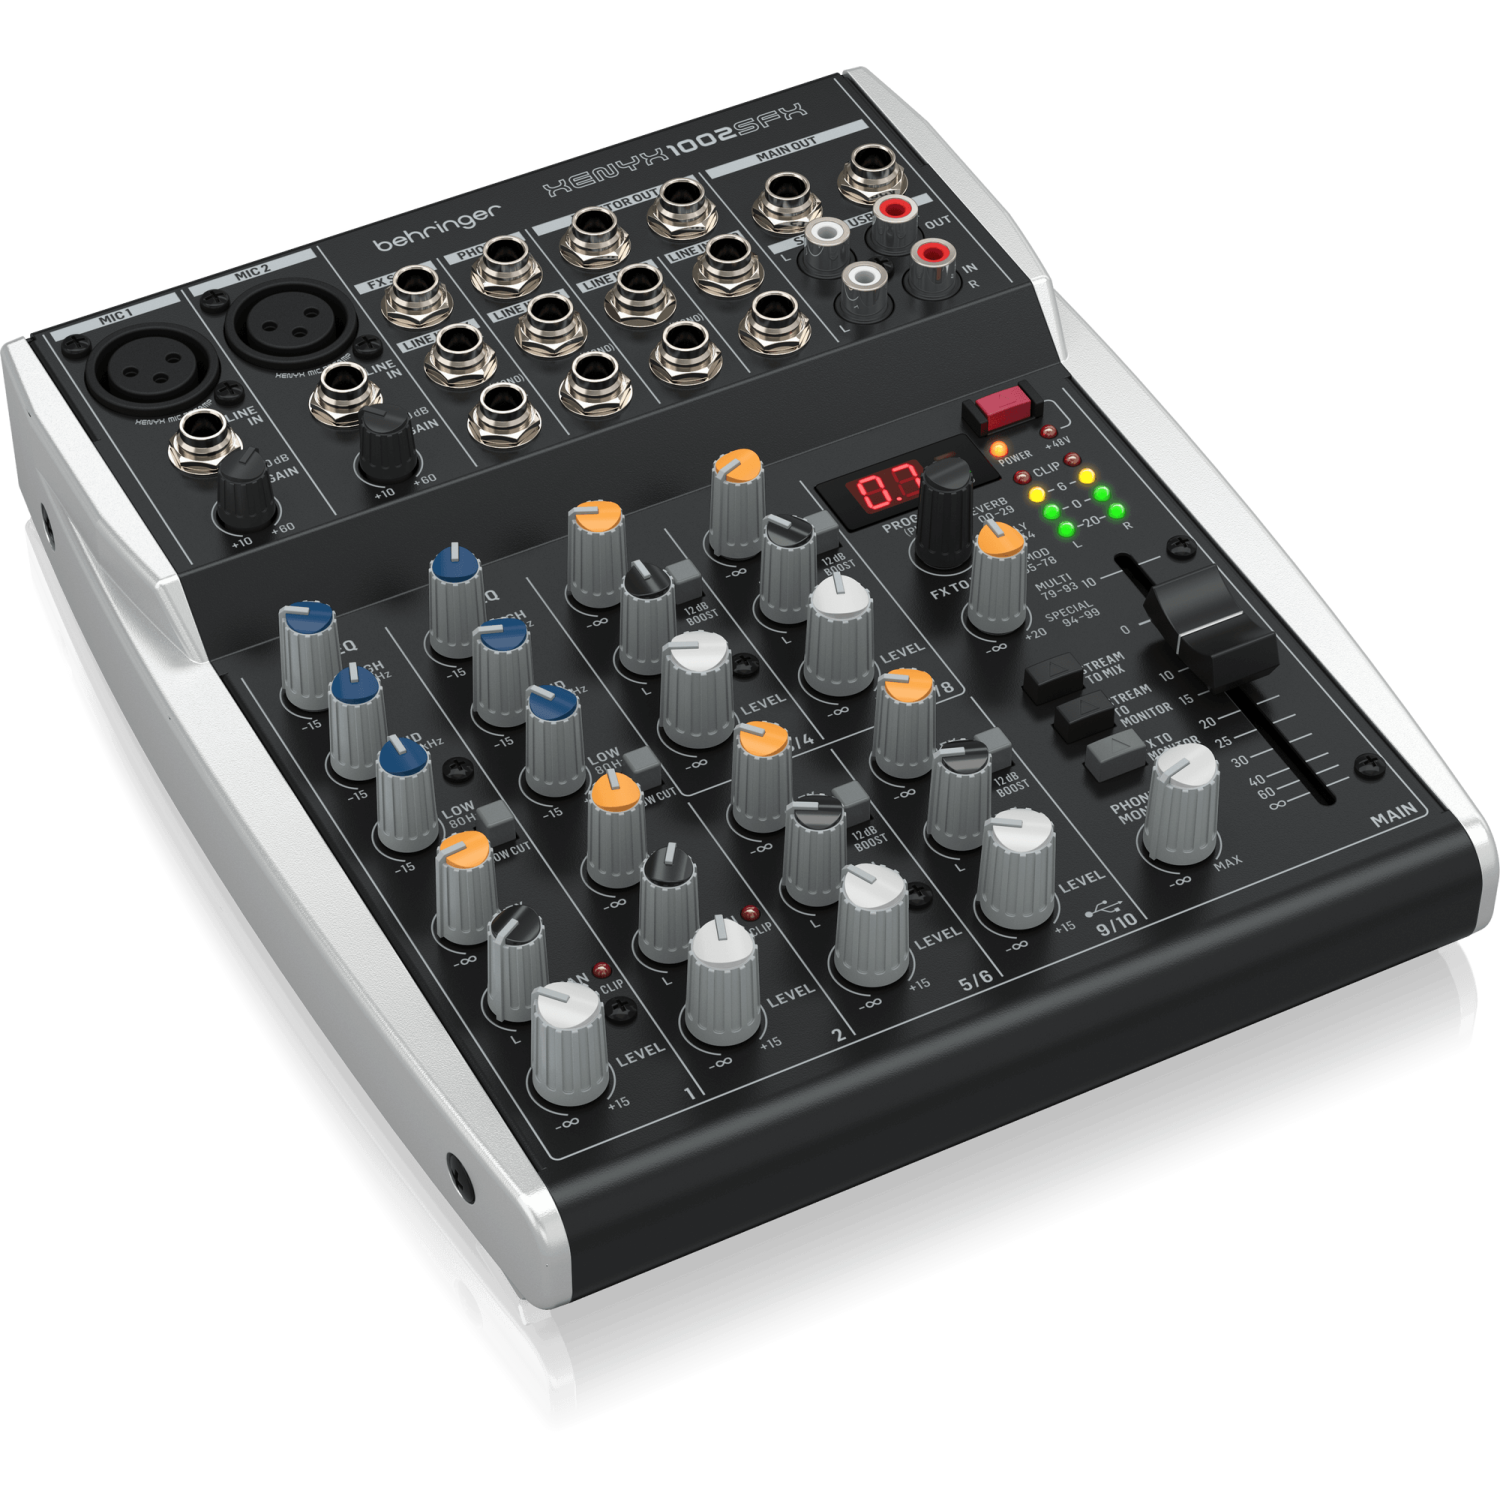 Behringer XENYX 1002SFX - mikser analogowy